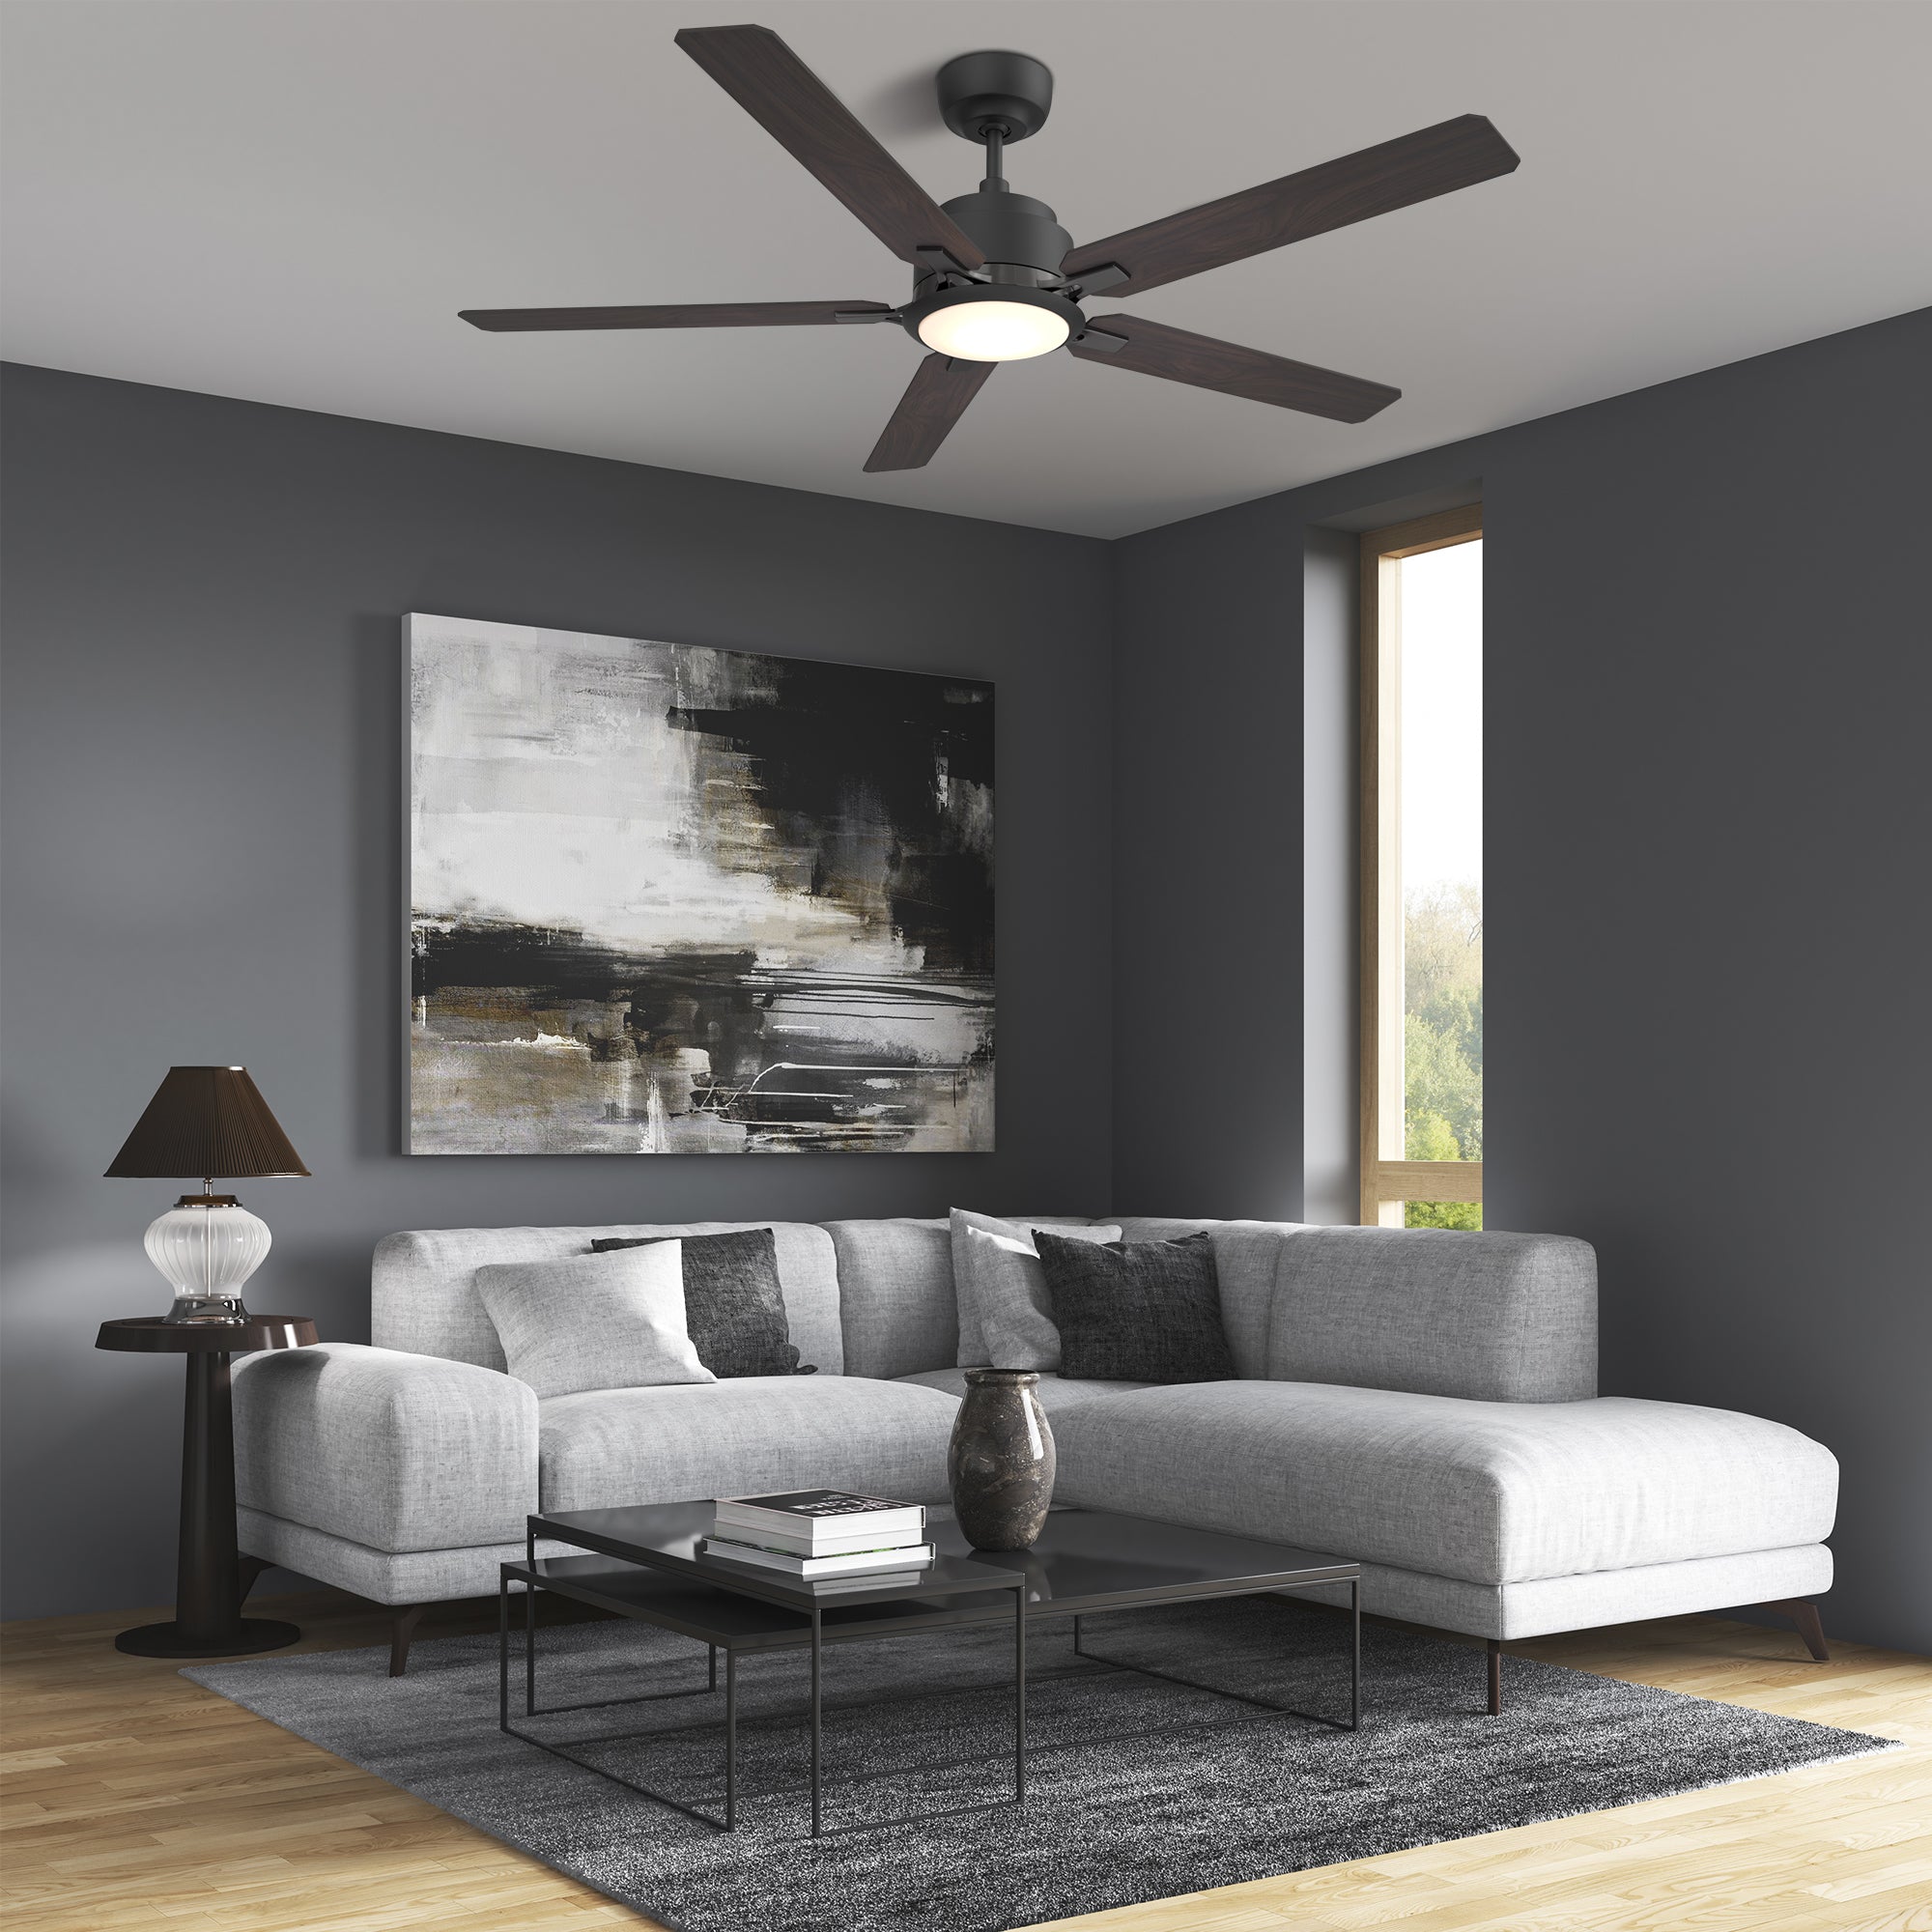 This Essex 60&#39;&#39; smart ceiling fan keeps your space cool, bright, and stylish. It is a soft modern masterpiece perfect for your large indoor living spaces. This Wifi smart ceiling fan is a simplicity designing with Black finish, use elegant Plywood blades and has an integrated 4000K LED cool light. The fan features Remote control, Wi-Fi apps, Siri Shortcut and Voice control technology (compatible with Amazon Alexa and Google Home Assistant ) to set fan preferences.